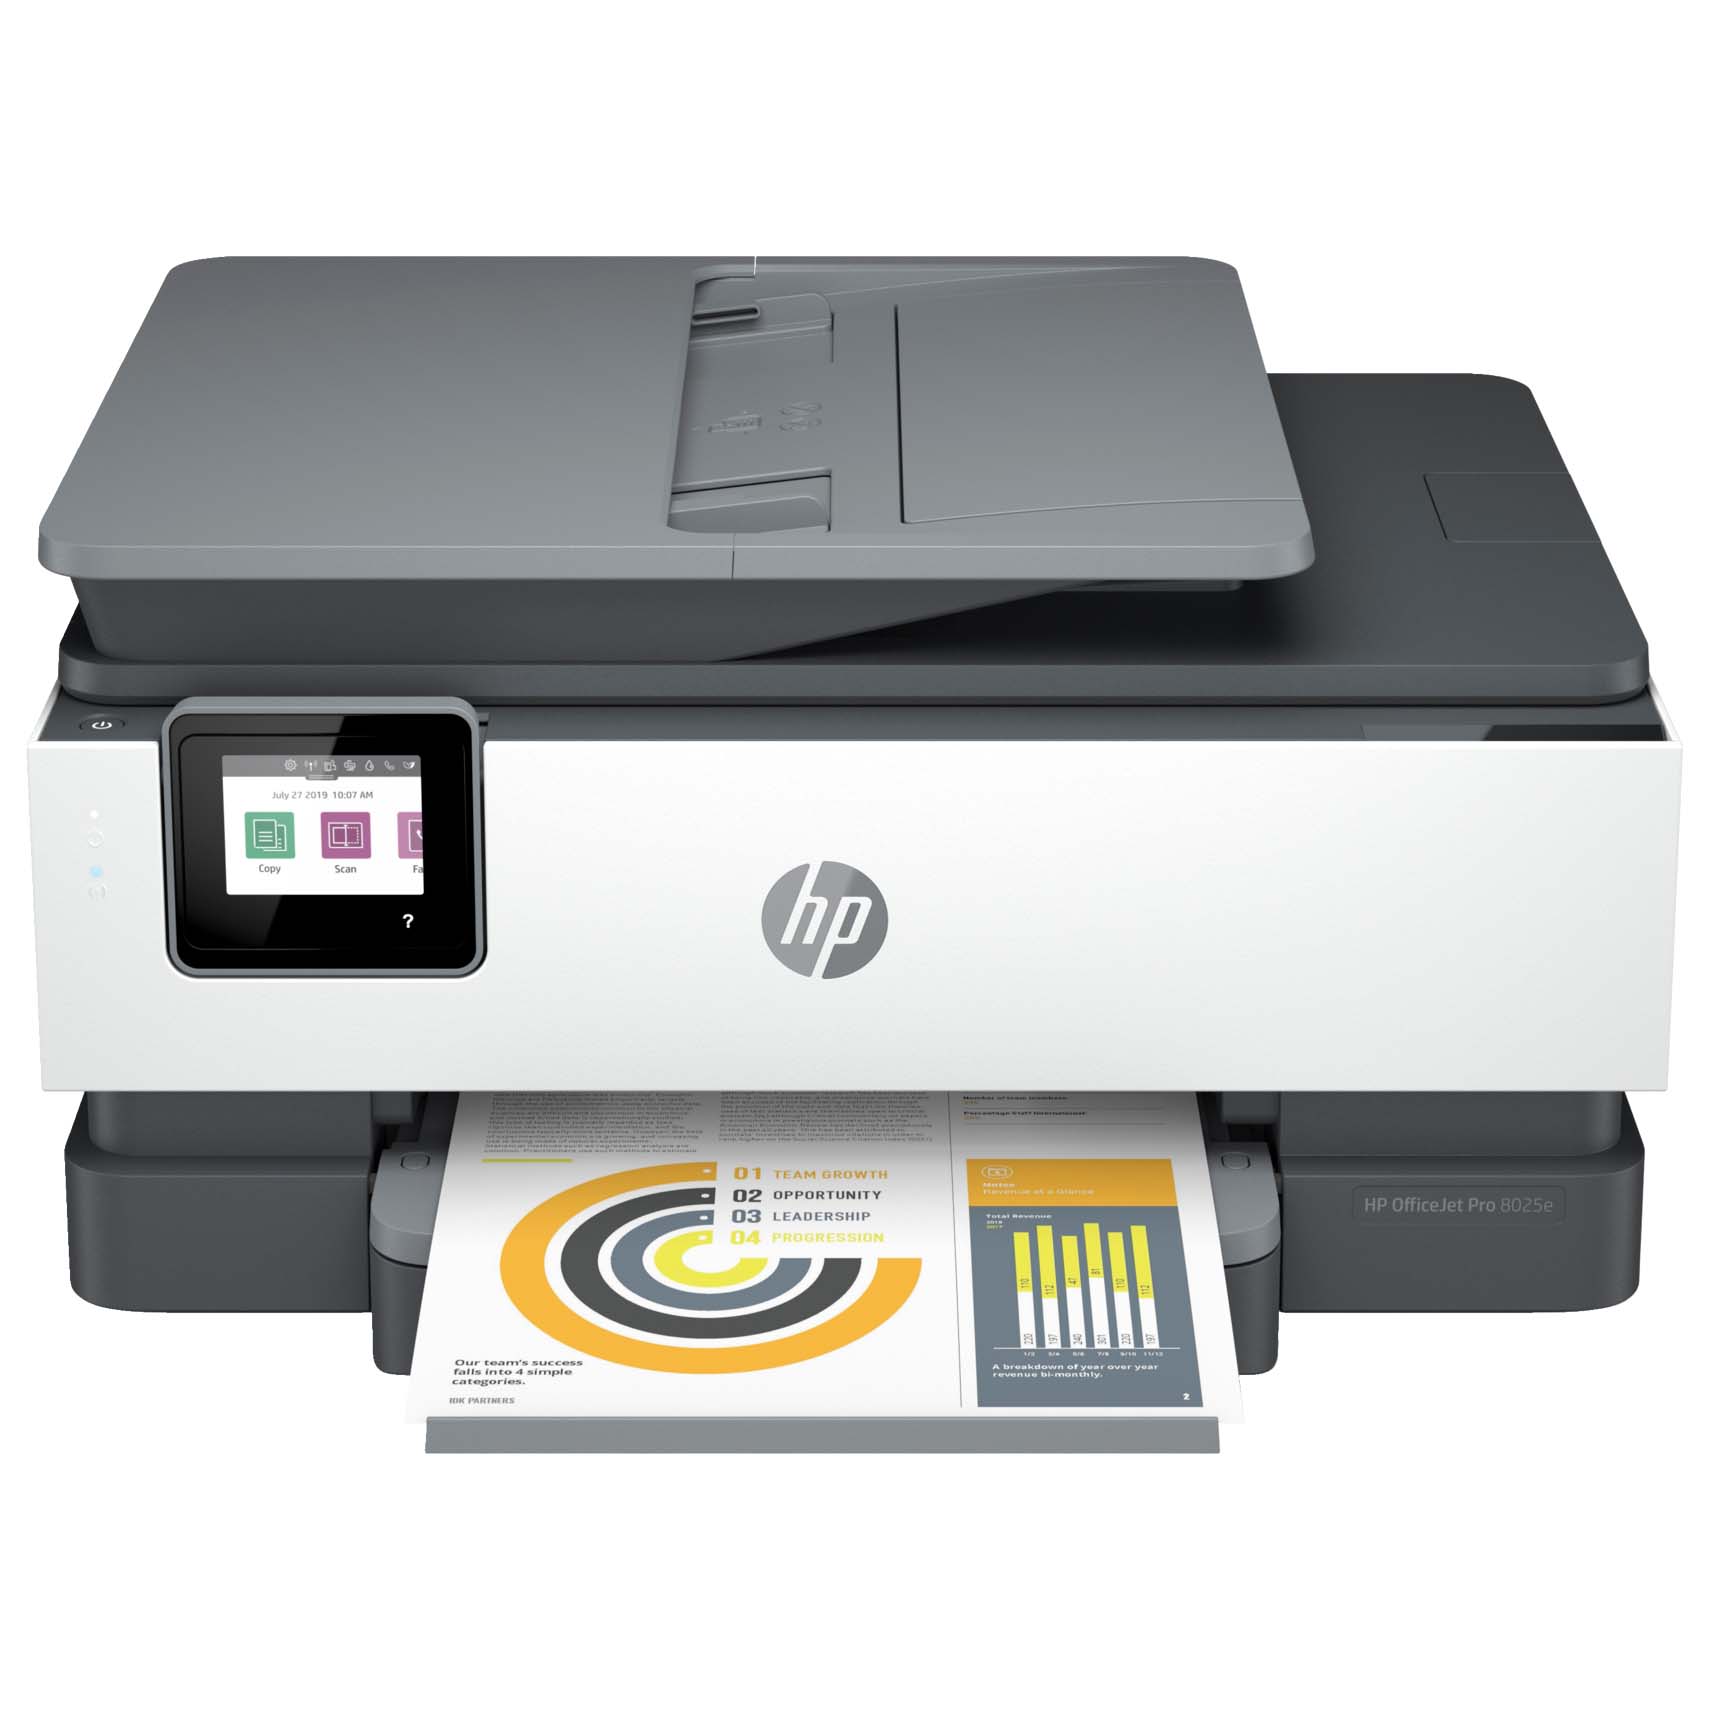 HP OfficeJet Pro printer with LCD screen